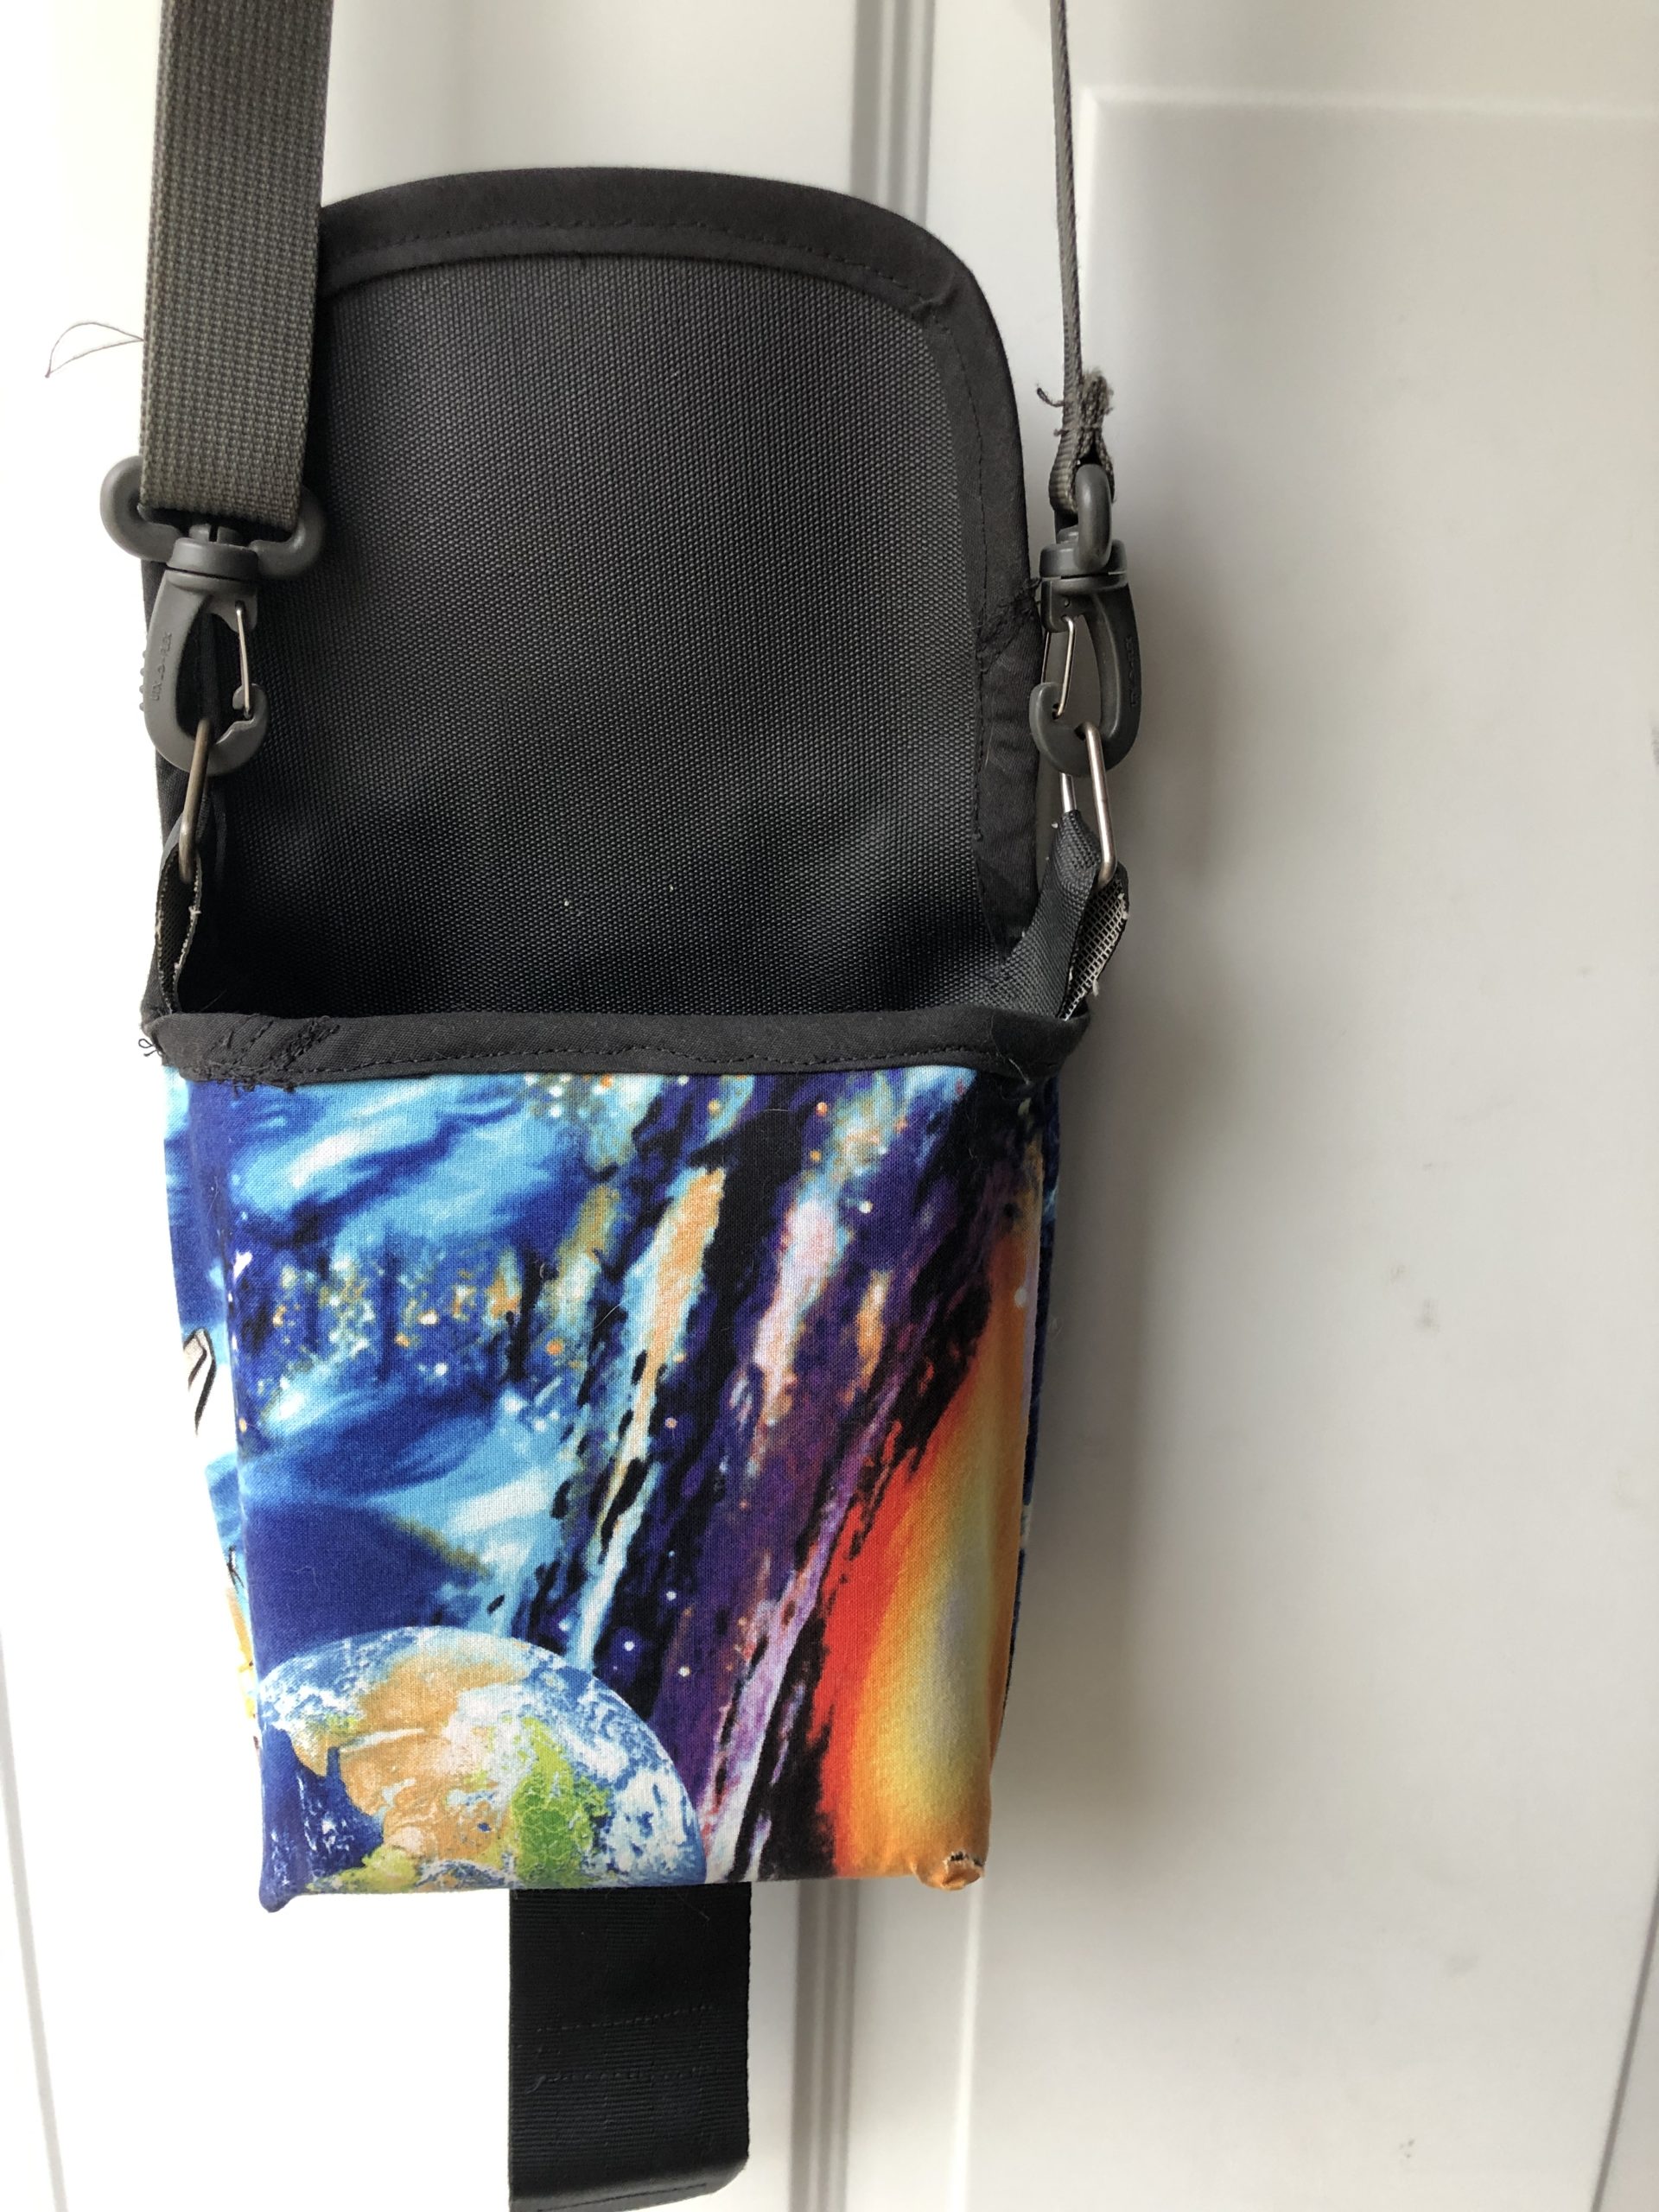 Outer Space bag!